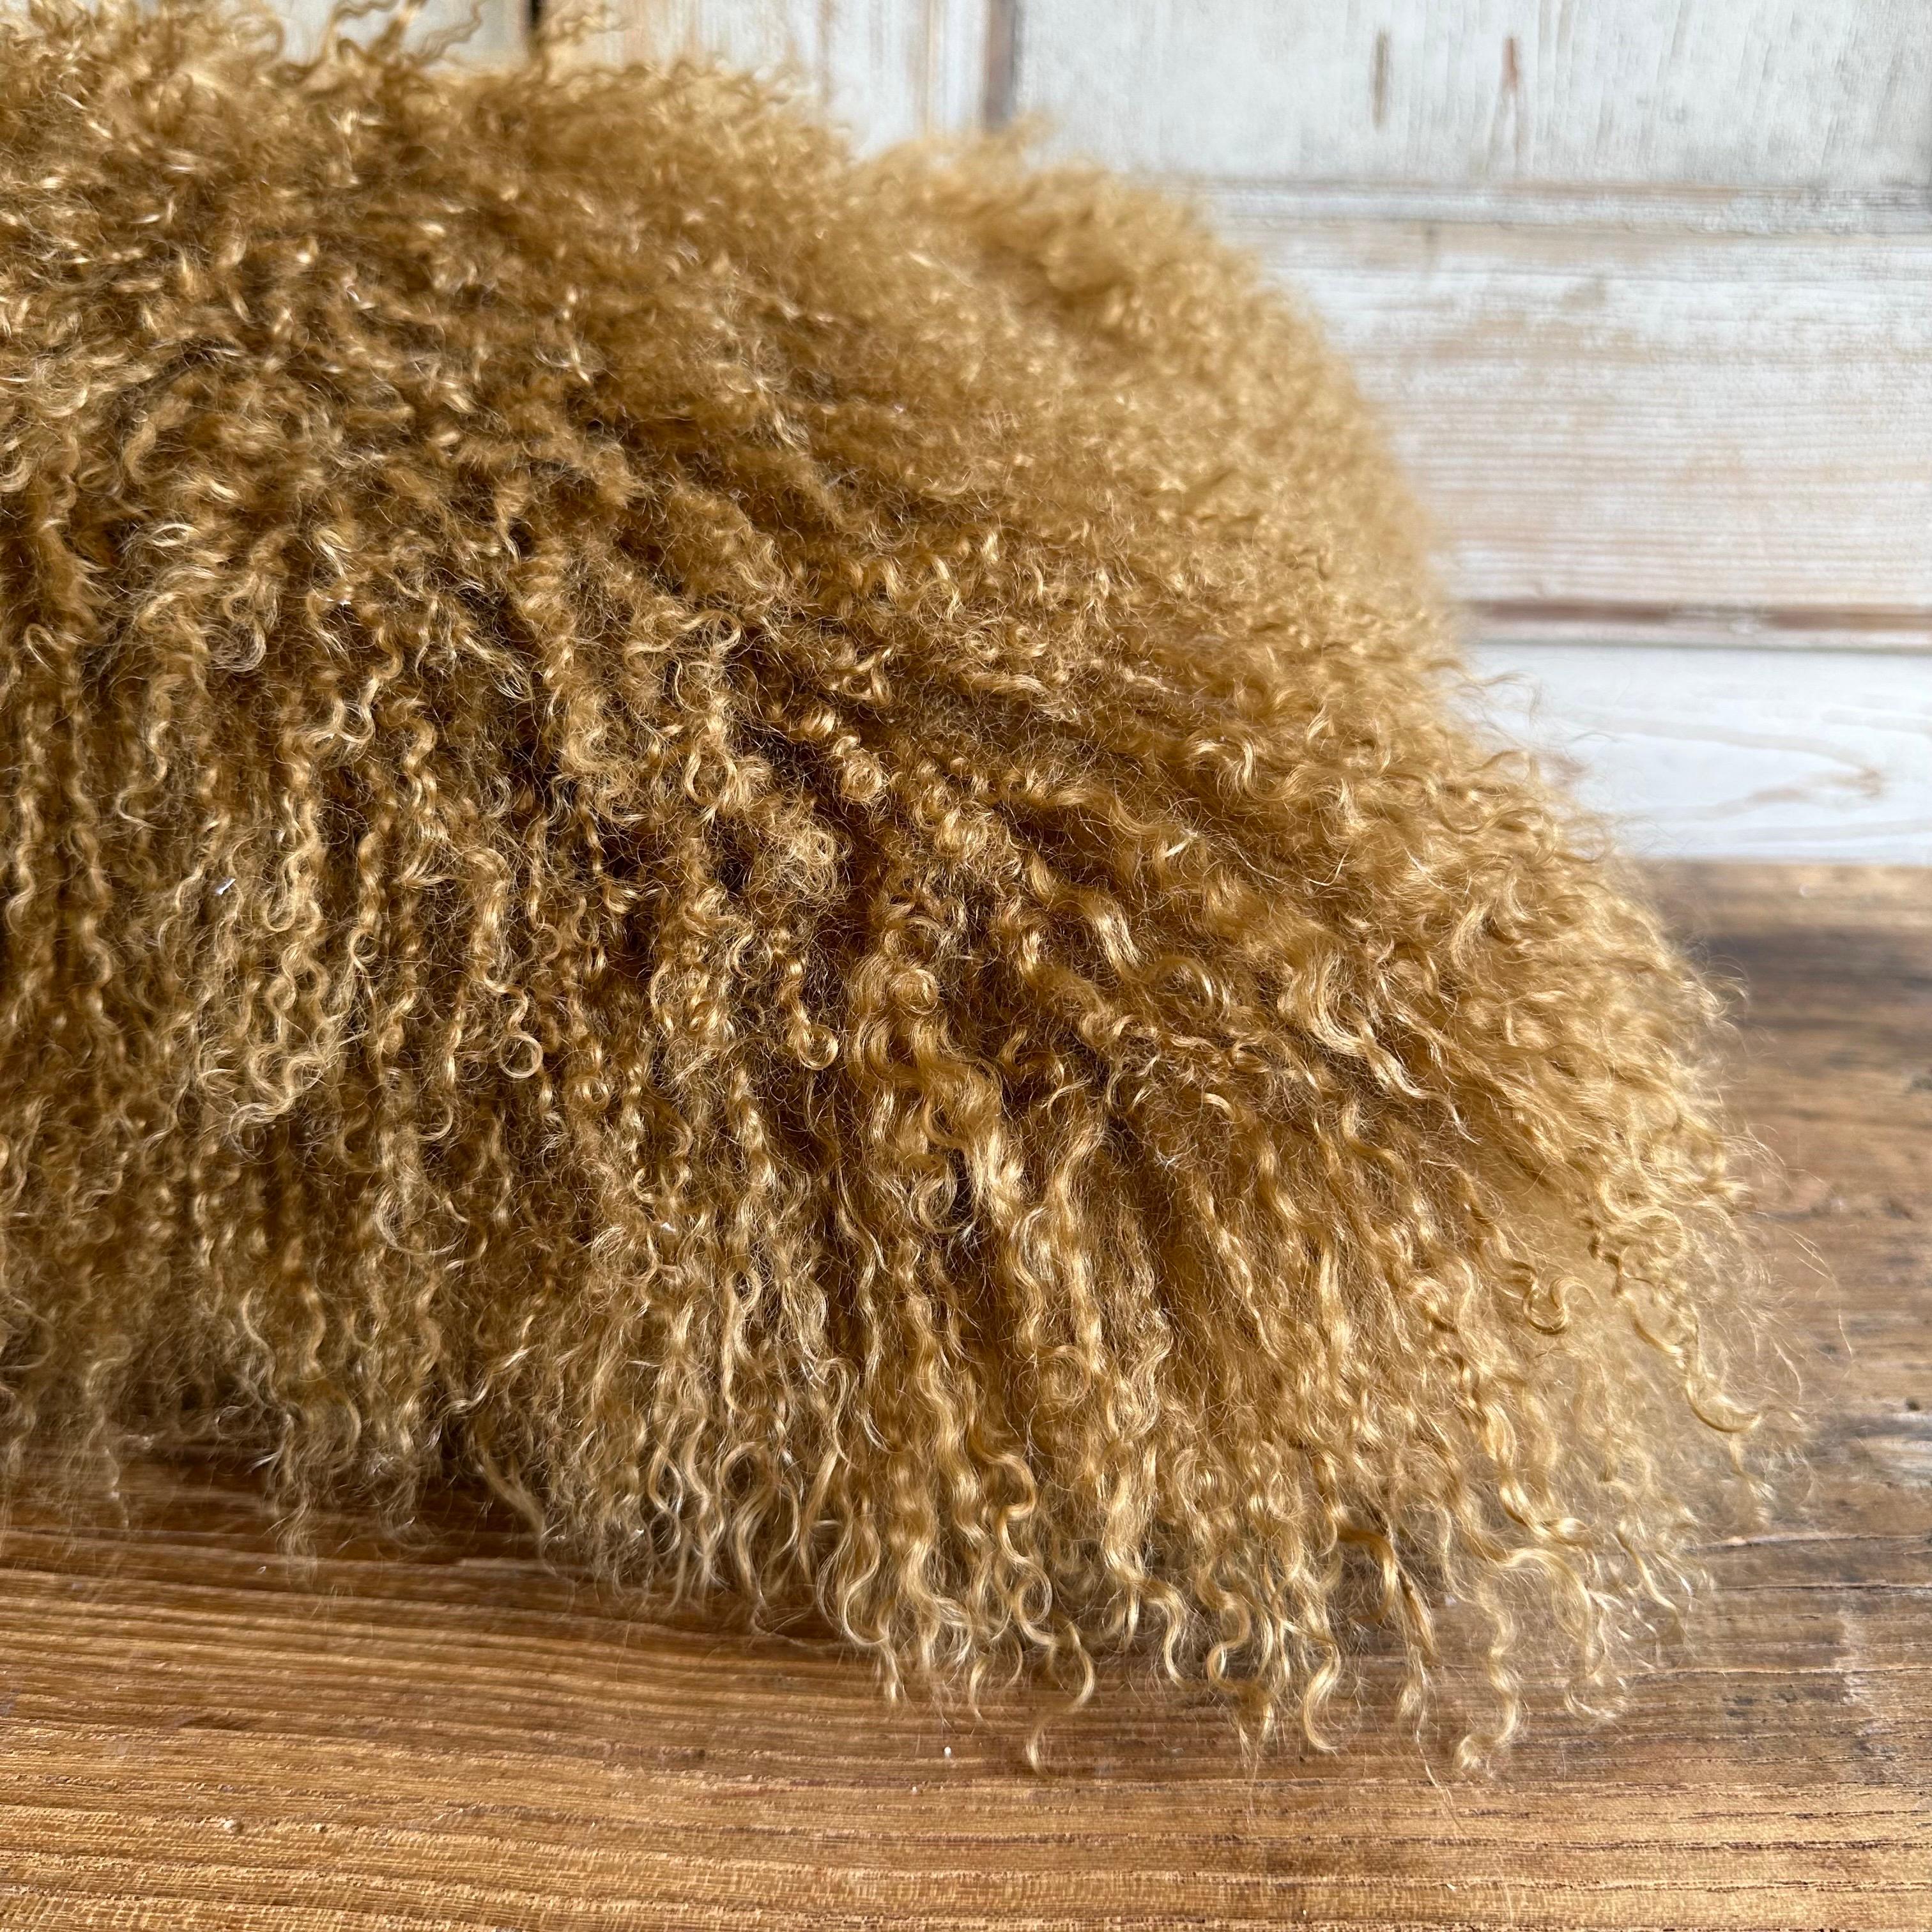 100% goat hair and linen accent pillow
Size: 15x24
Made in France
Color: Havane ( a deep rusty brown)
Extremely soft and cozy goat hair with a slight curly or wavy appearance.
Back side is 100% French European natural linen, with button